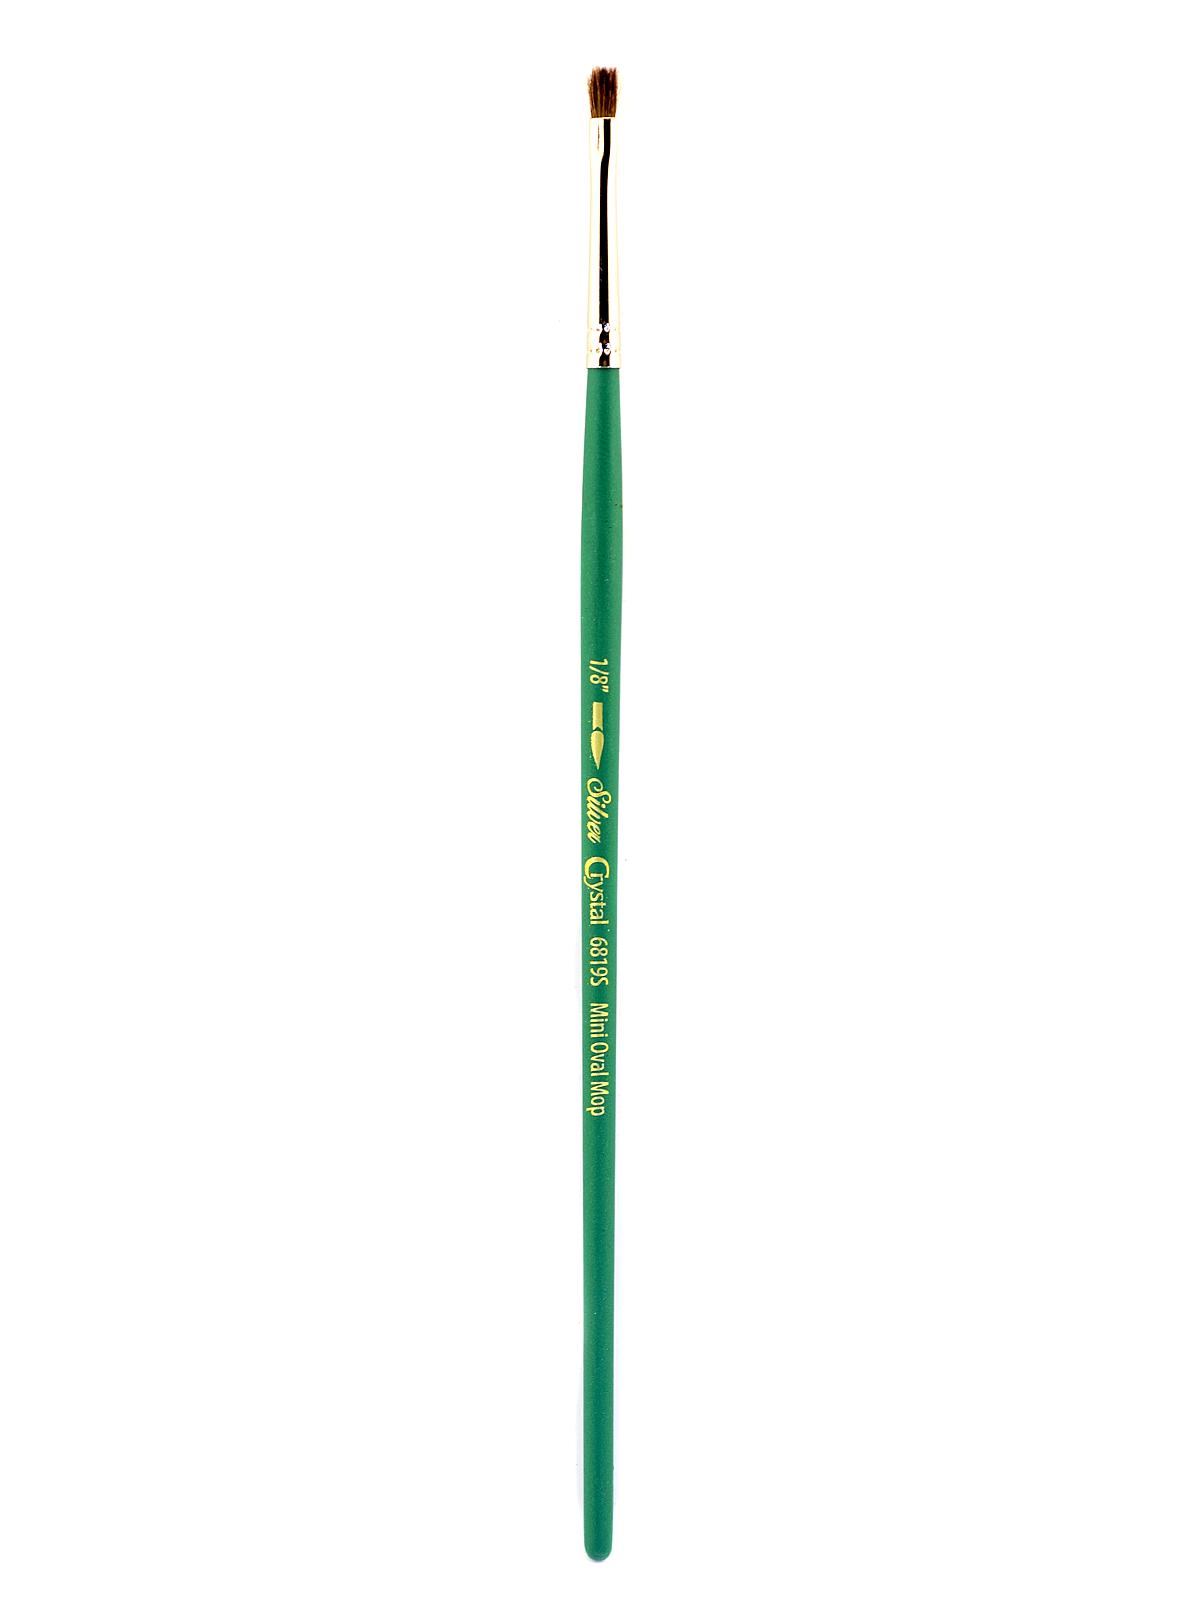 Crystal Series Brushes 1 8 In. Mini Oval Mop 6819S